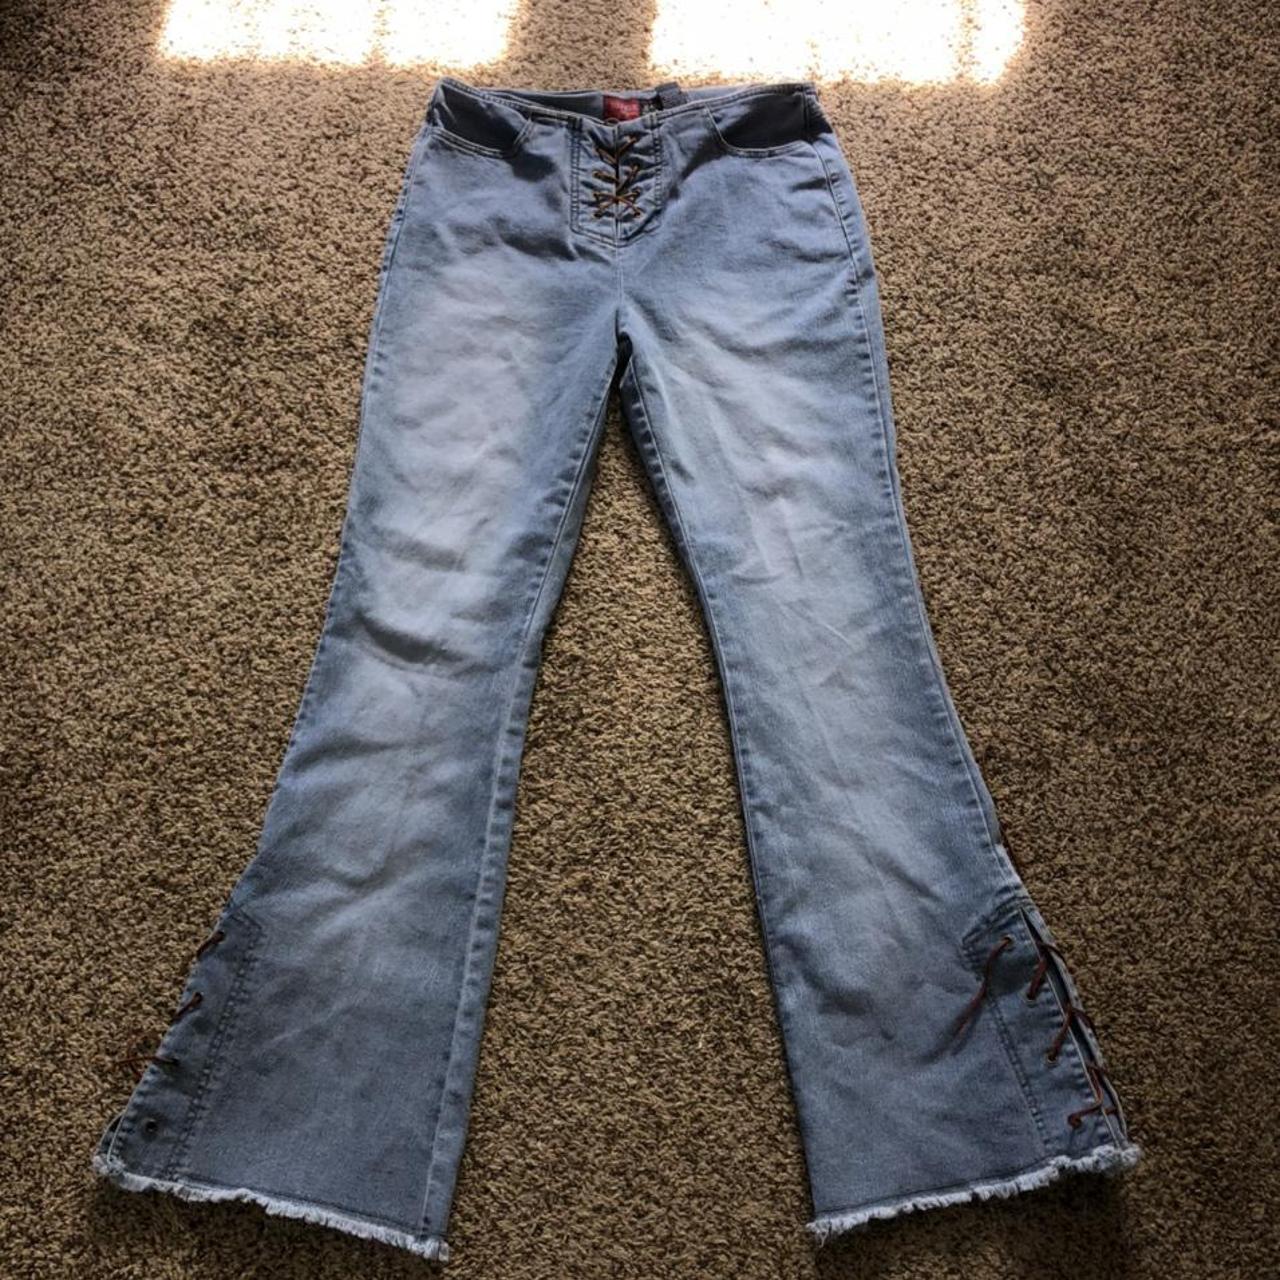 Early 2000s cowgirl leather lace pants/ jeans Y2k... - Depop